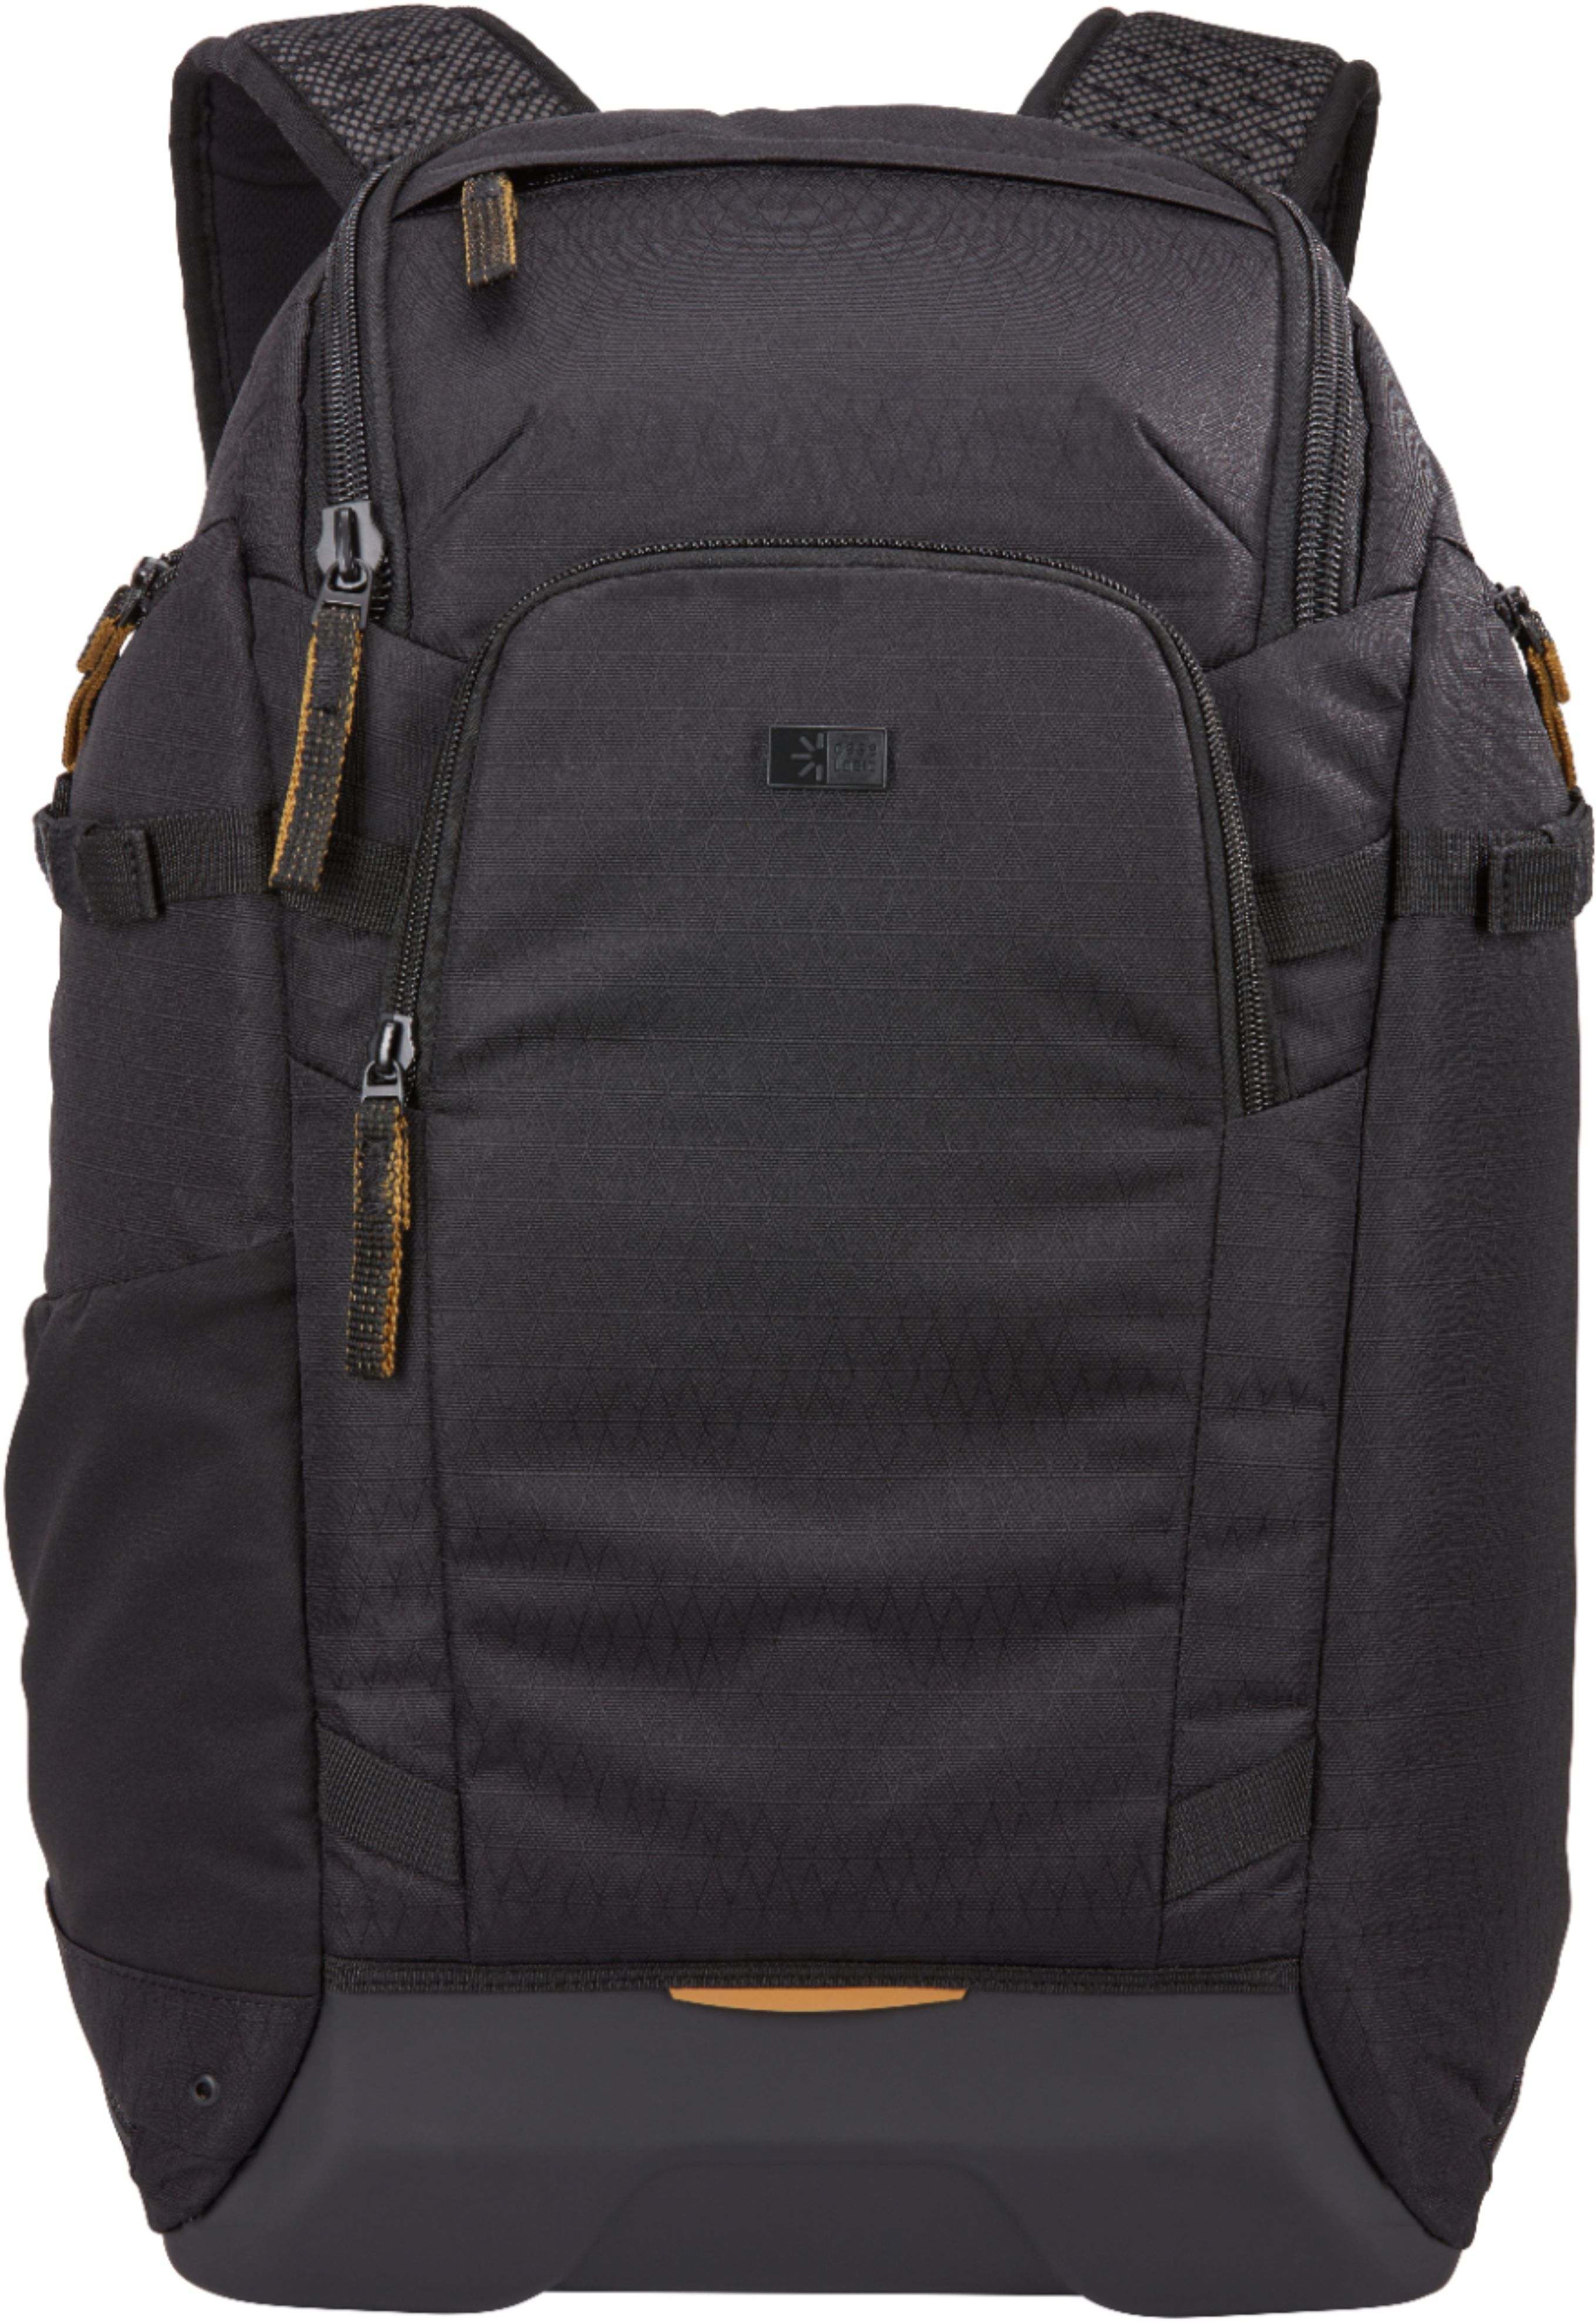 Please help! Looking for a similar backpack with black base like